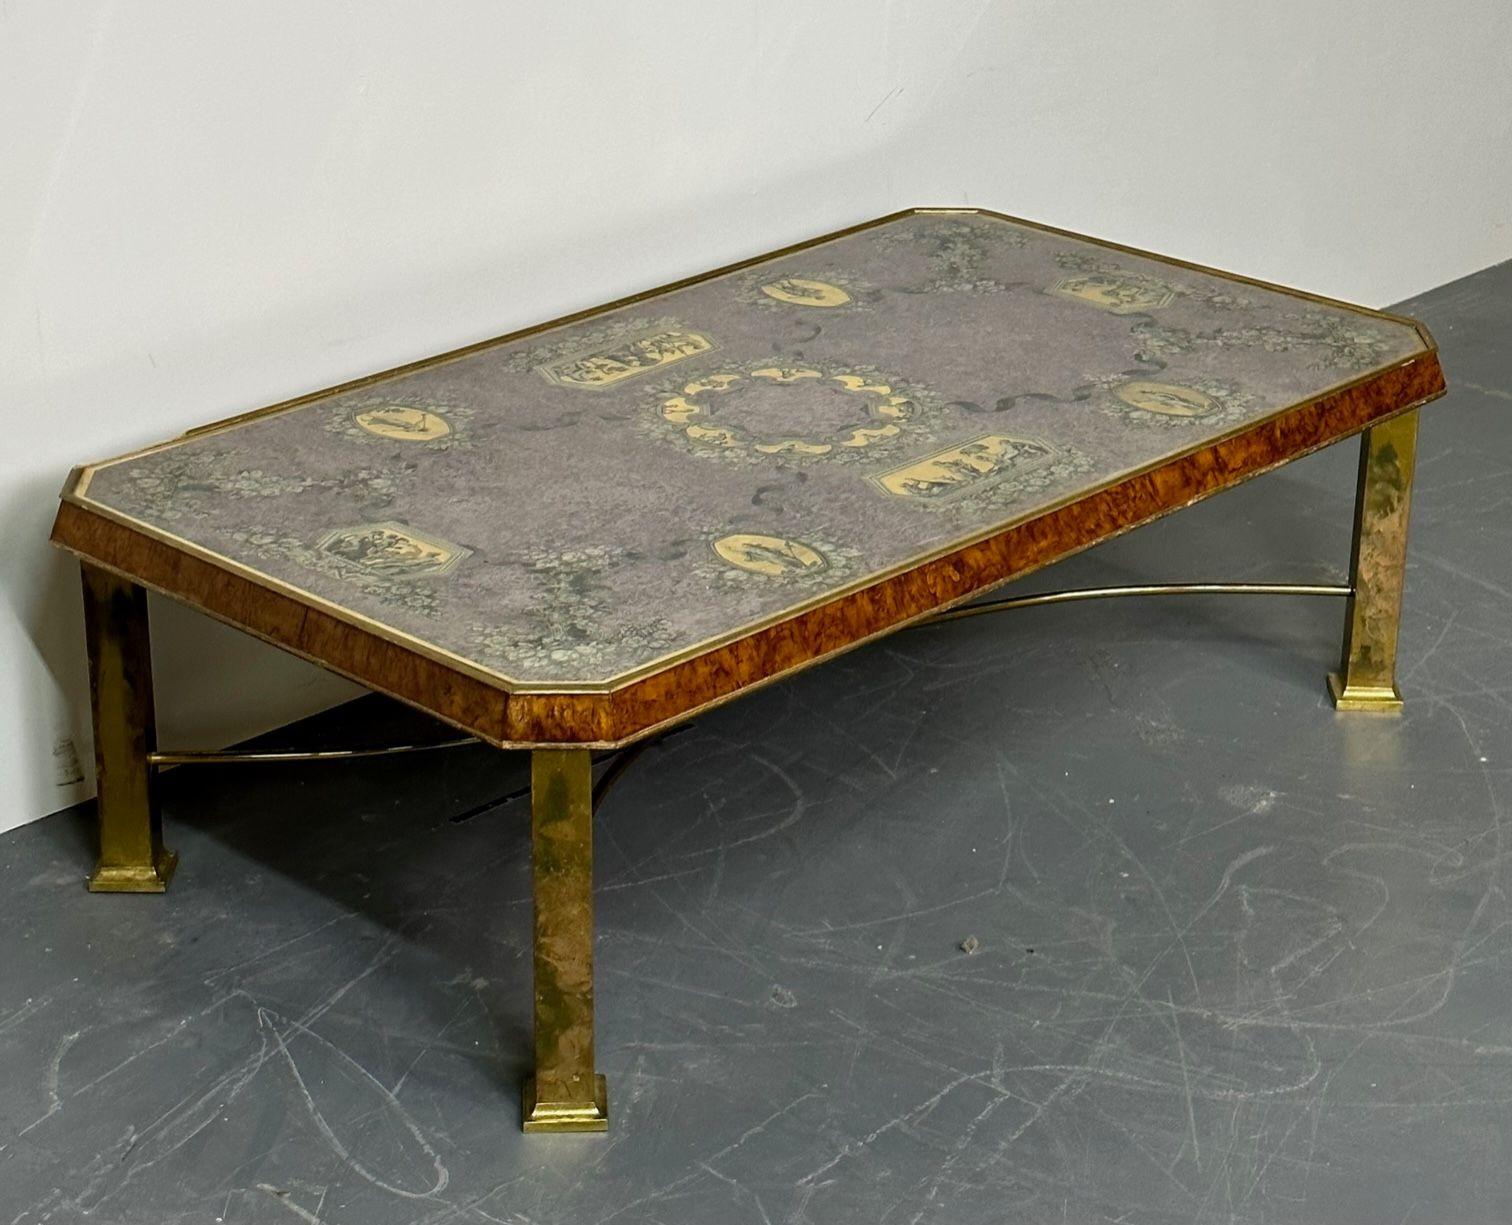 Piero Fornasetti Style Italian Coffee, Cocktail Table, Bronze, Burlwood, 1940s In Good Condition For Sale In Stamford, CT